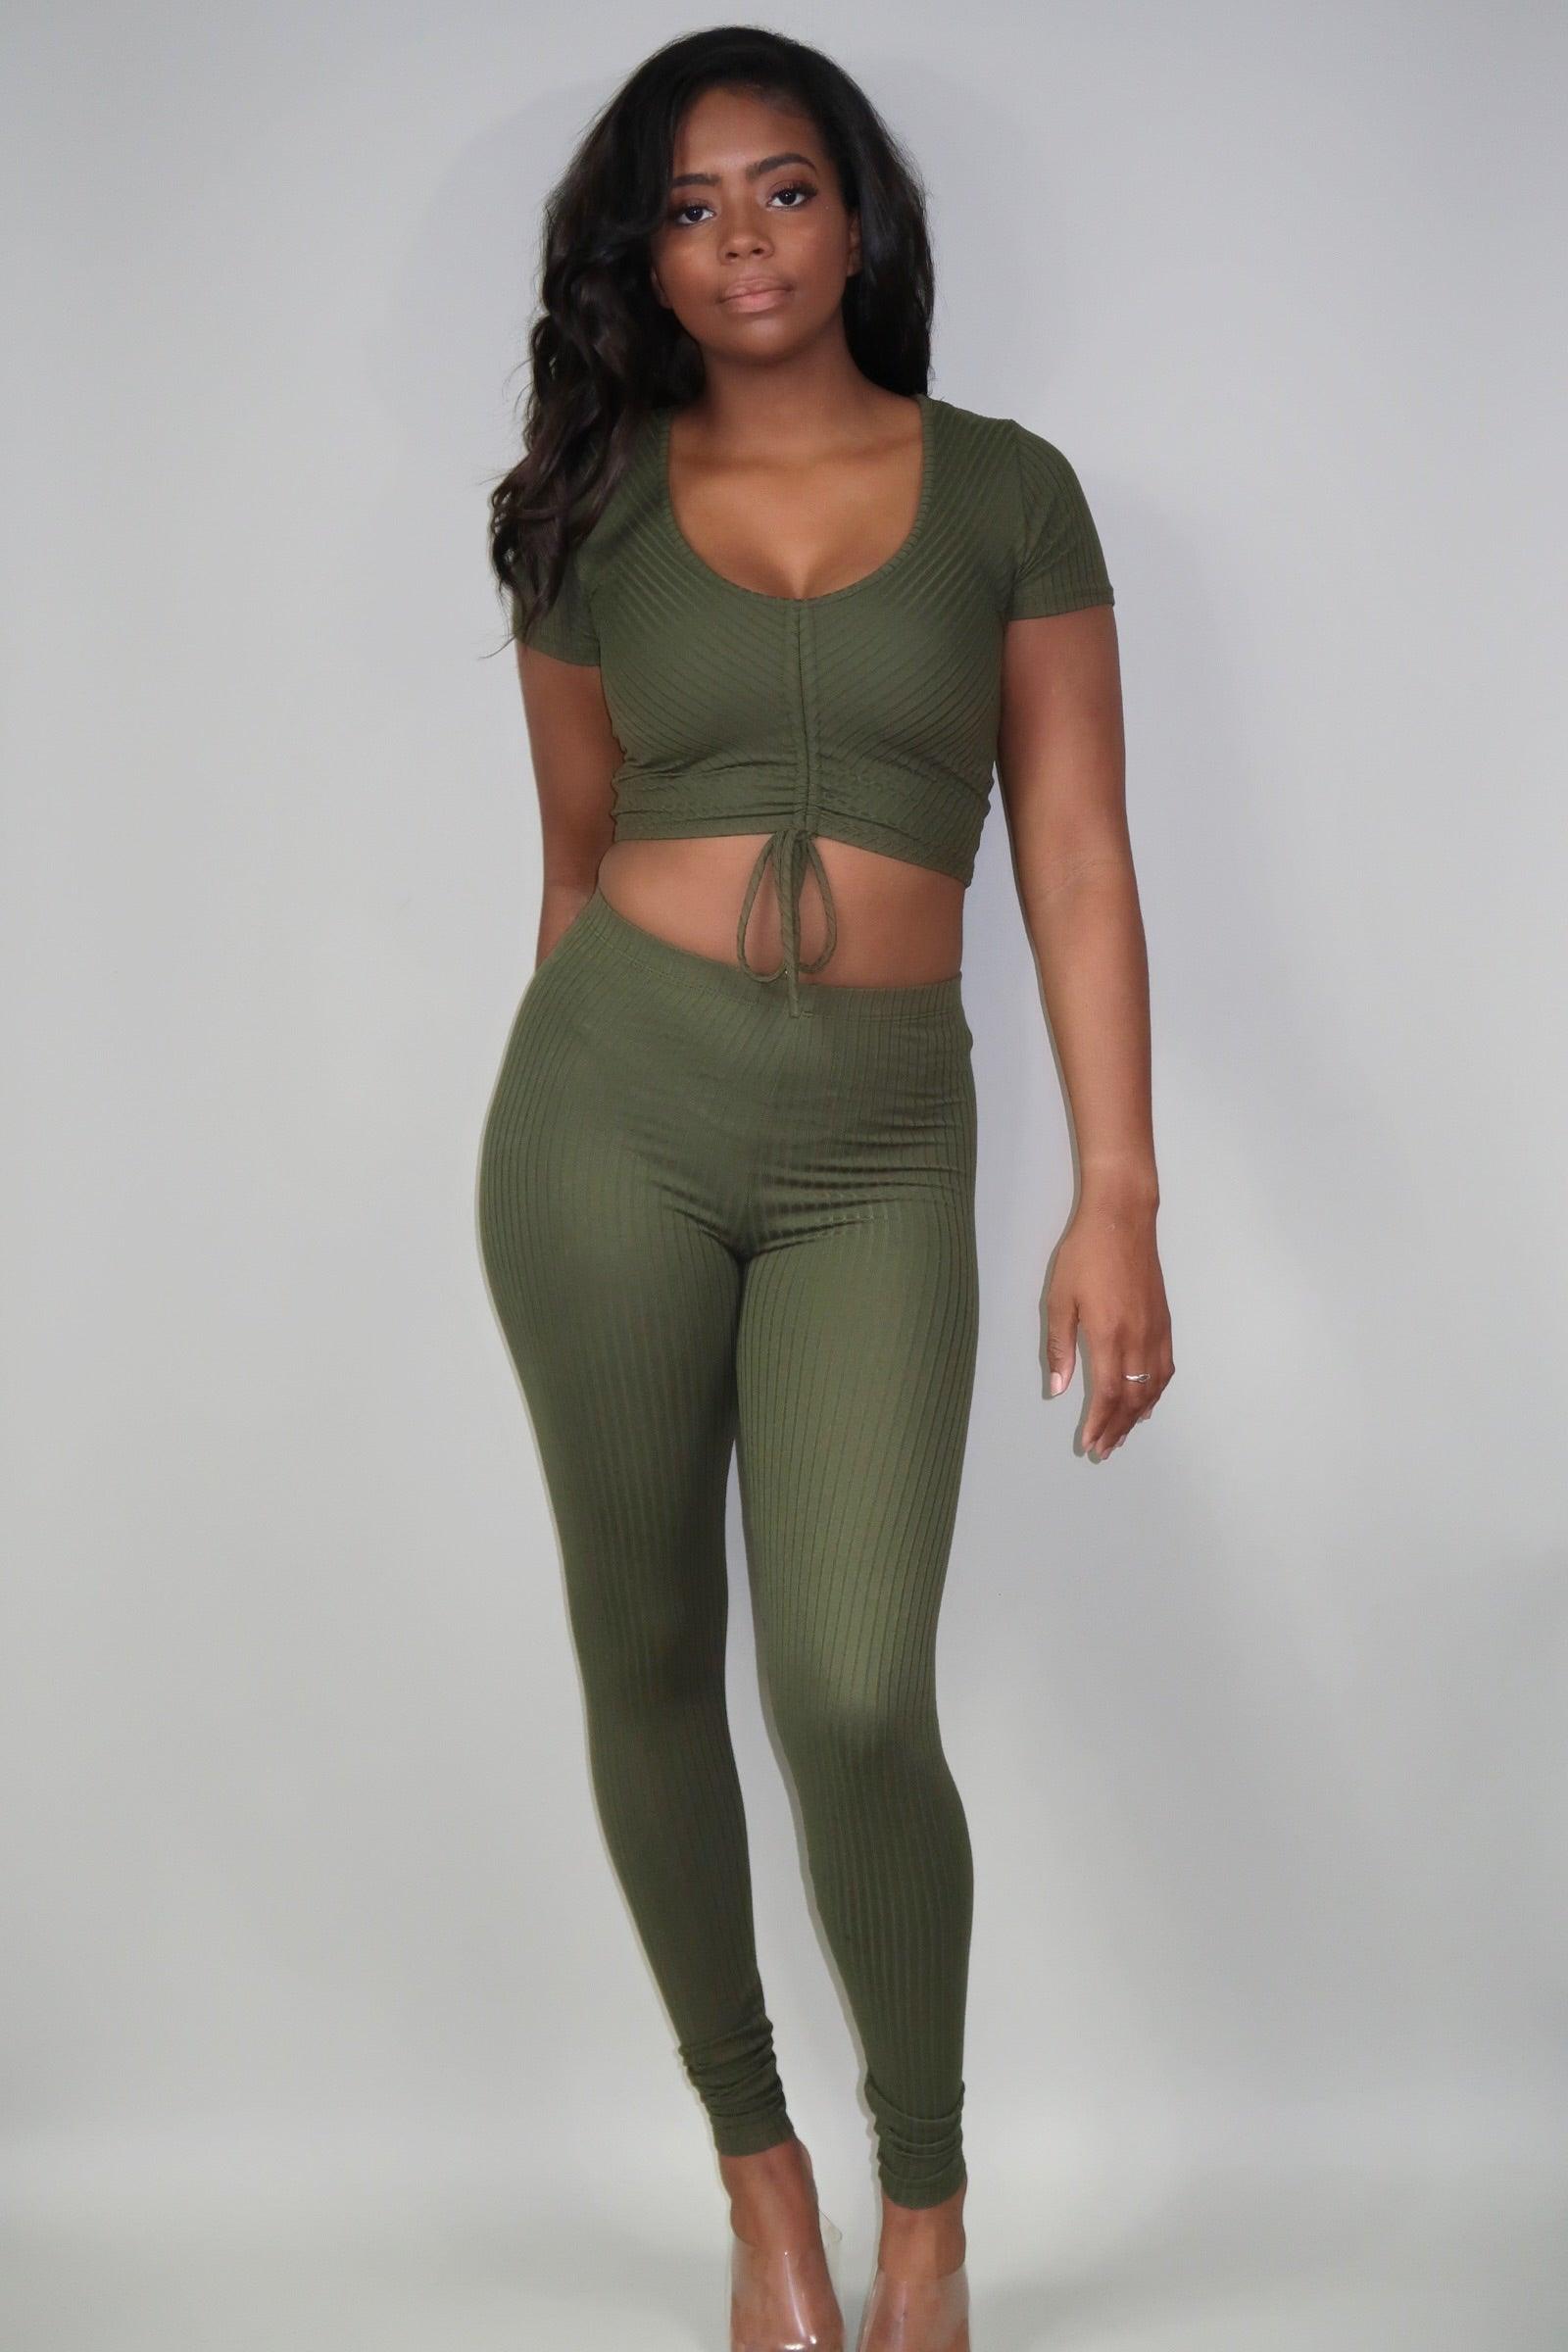 Ruched Top Legging Set  Olive – FIERCE FASHION by Lexi